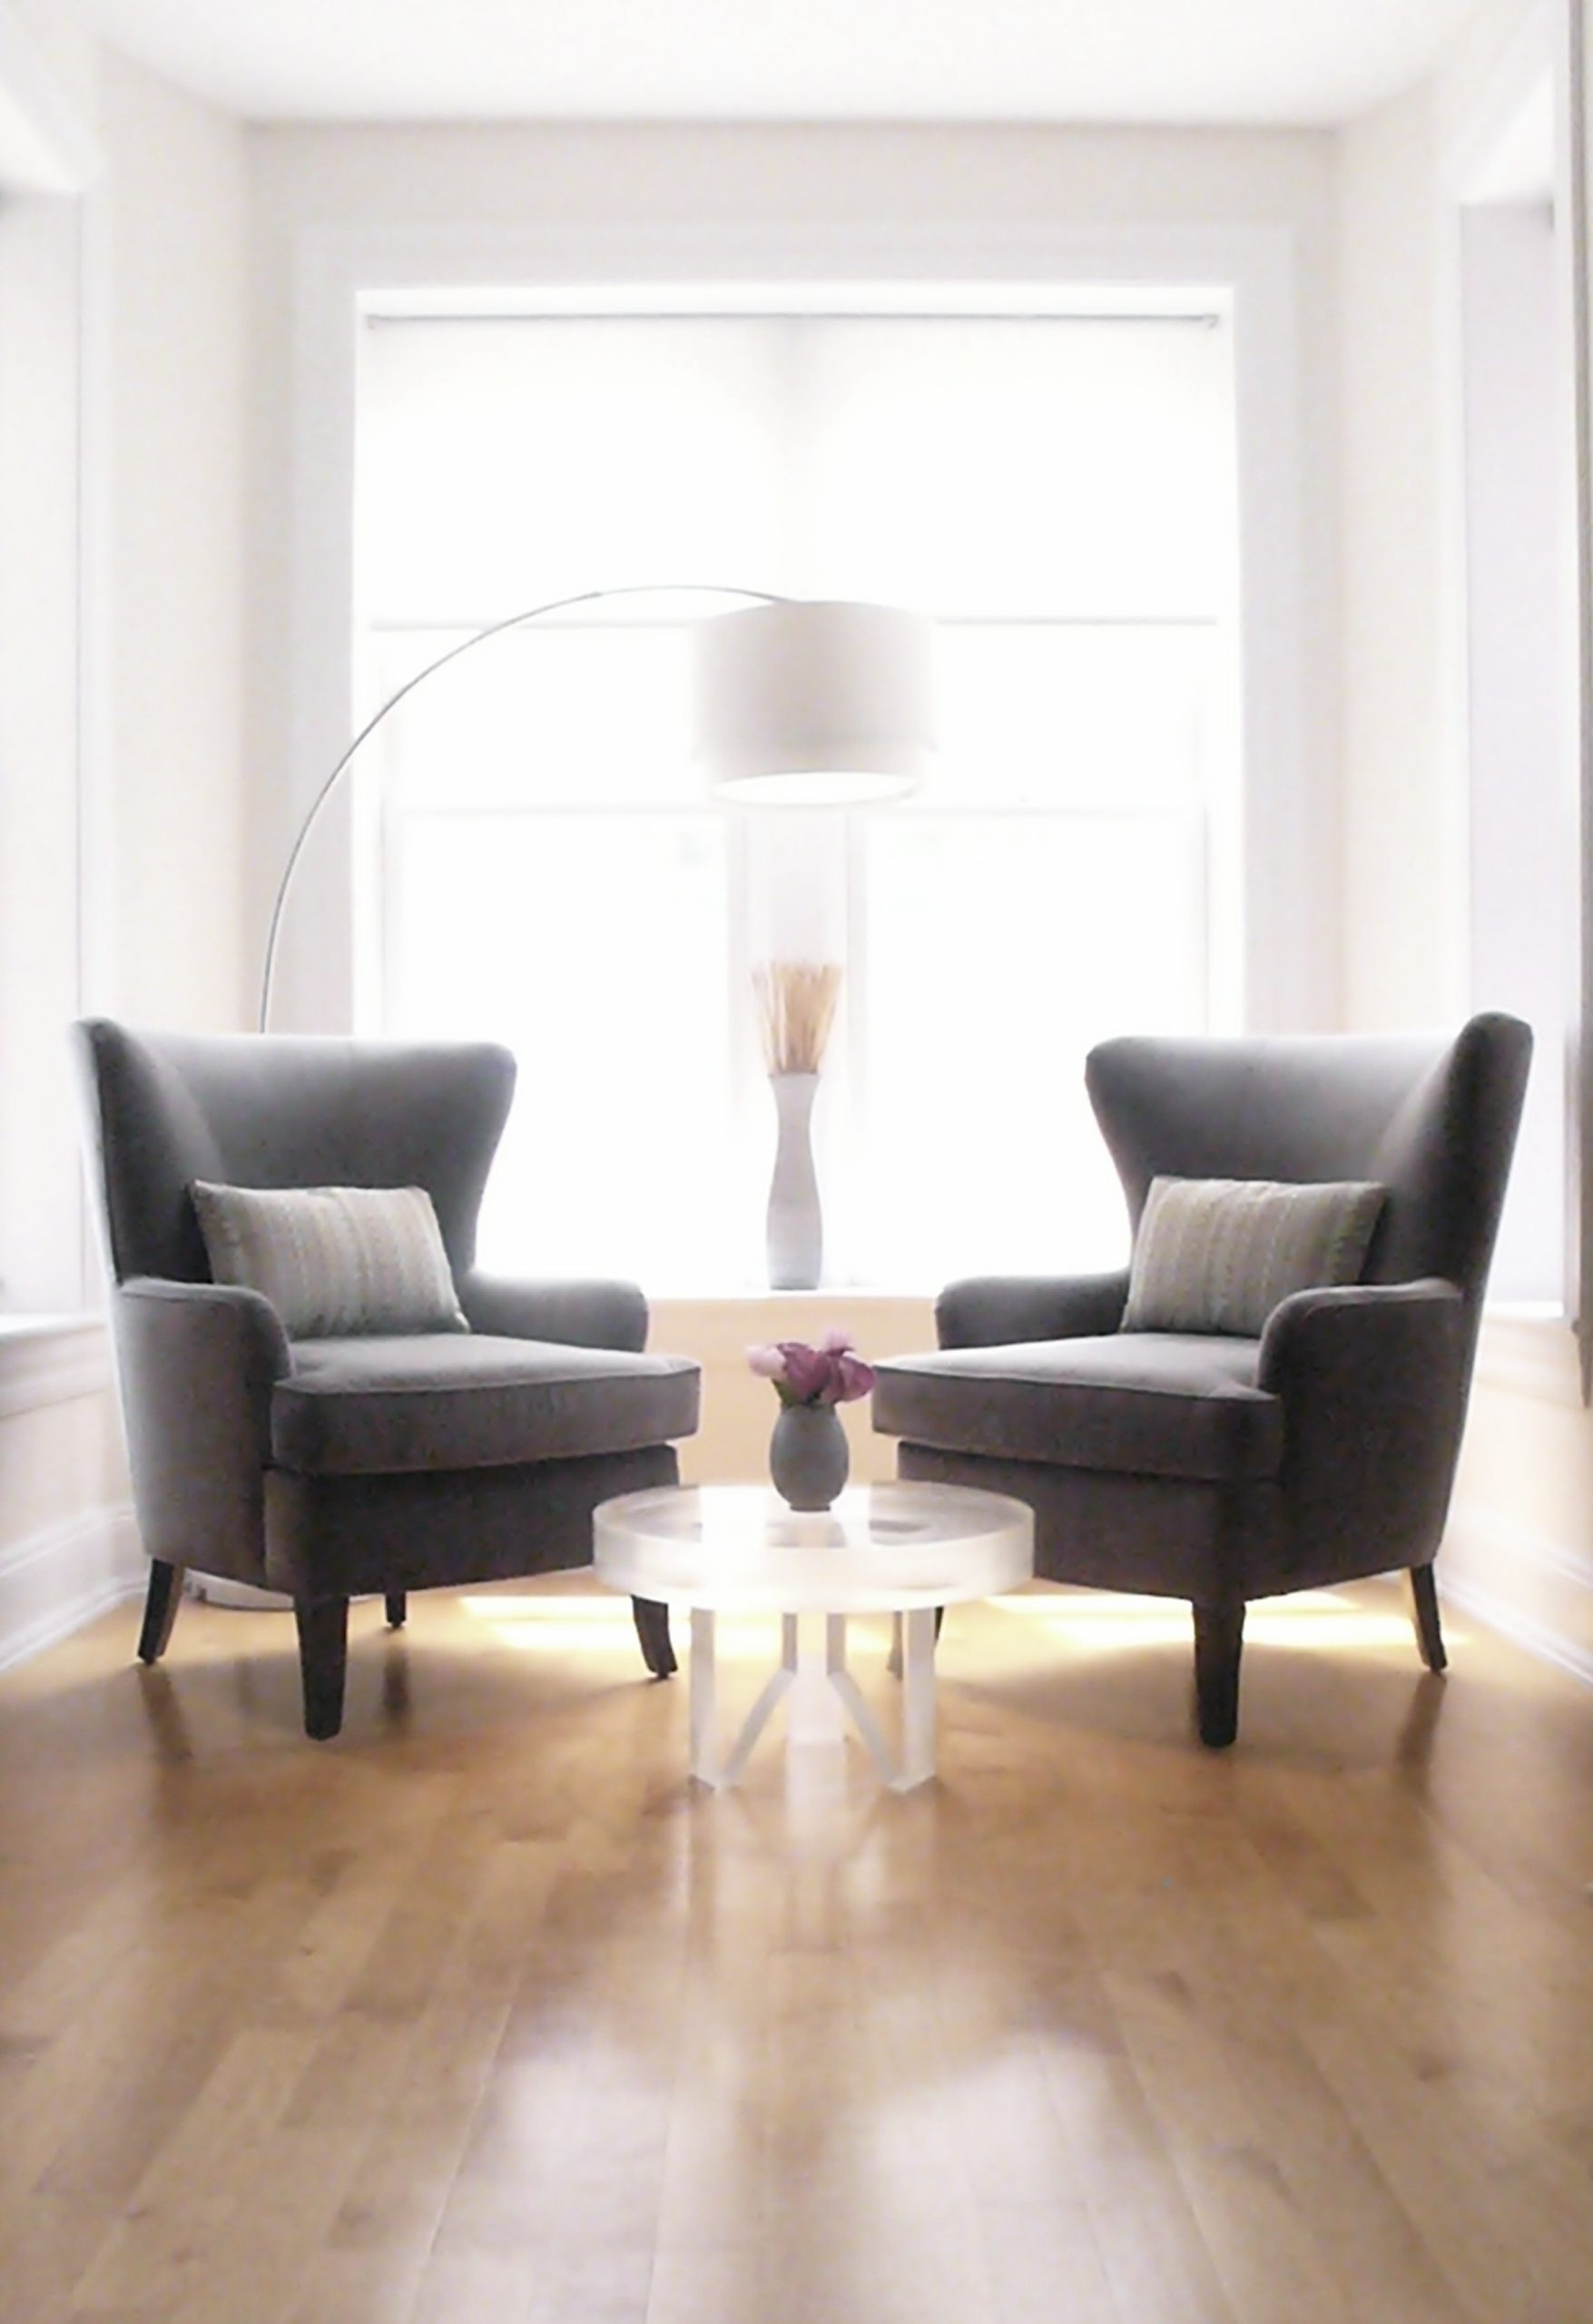 Two gray armchairs and small round table with window in the background in the office